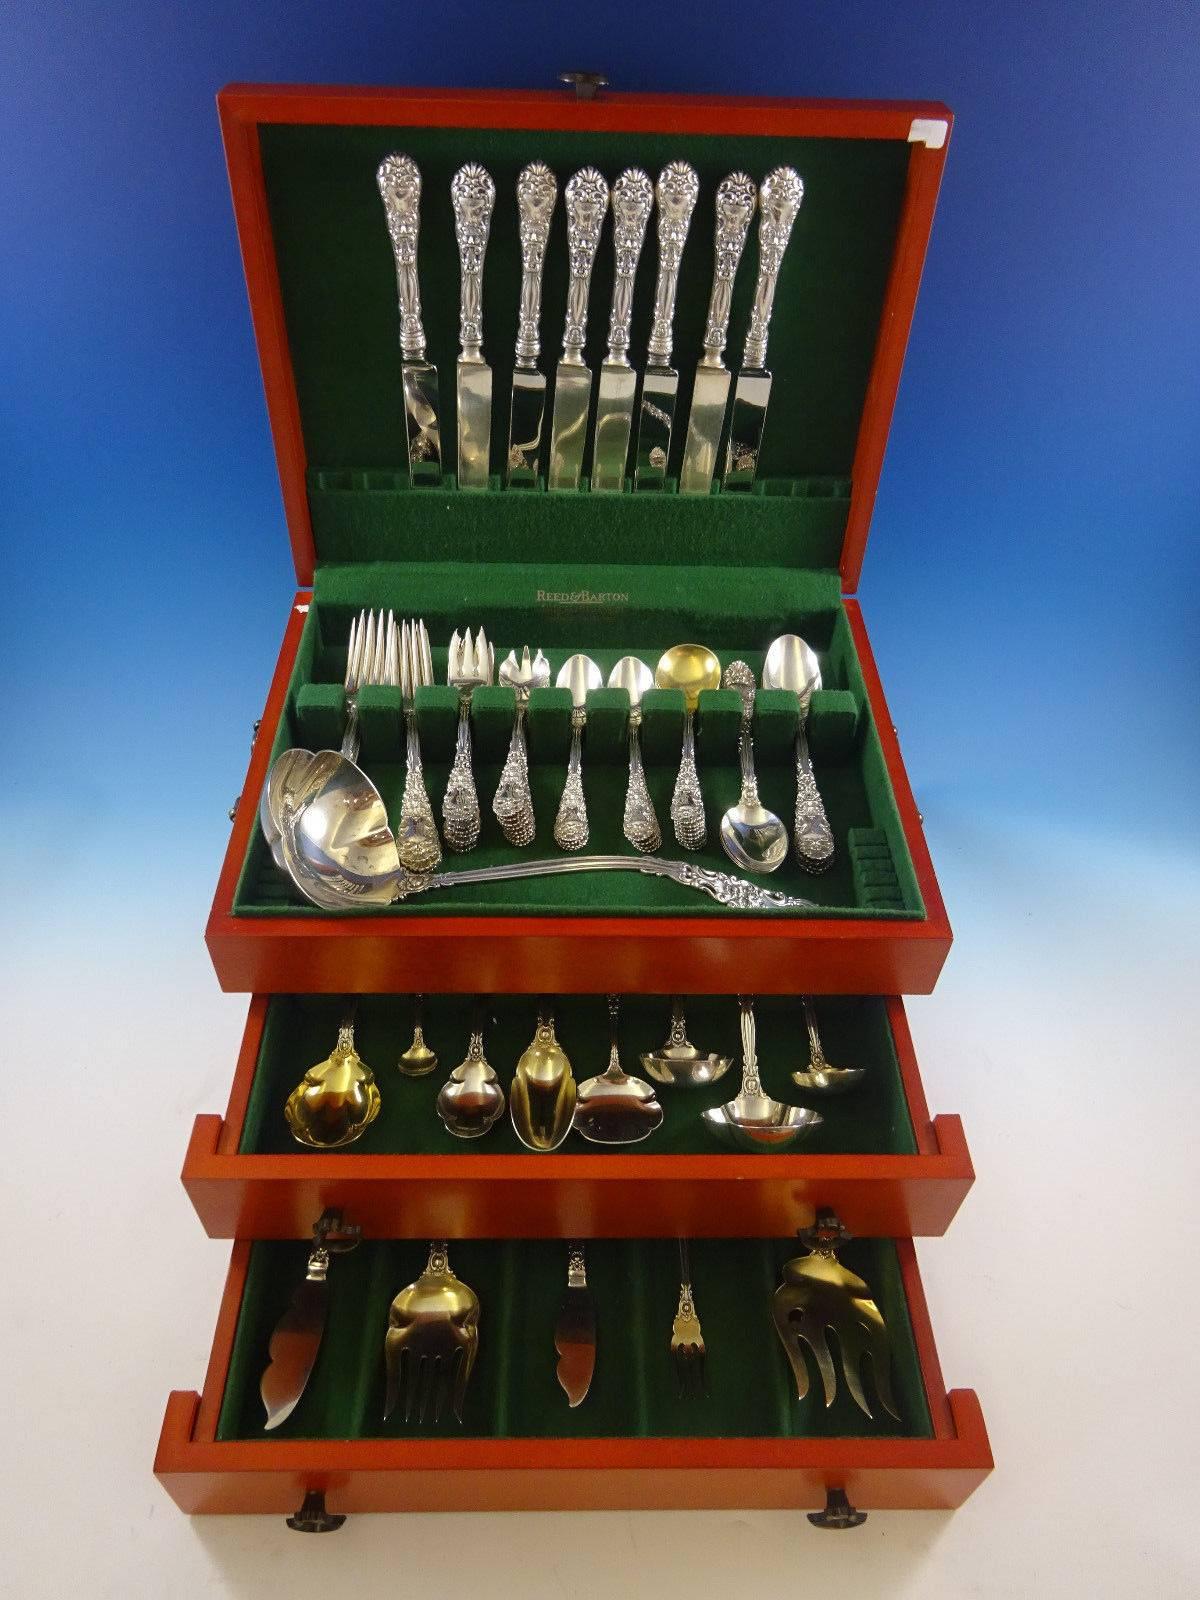 Renaissance by Dominick and Haff sterling silver dinner size flatware set of 71 pieces. This scarce figural pattern features a North Wind Face on the handle and on the back of the spoon bowls - in fine detail. 

This set includes:
 
Eight dinner